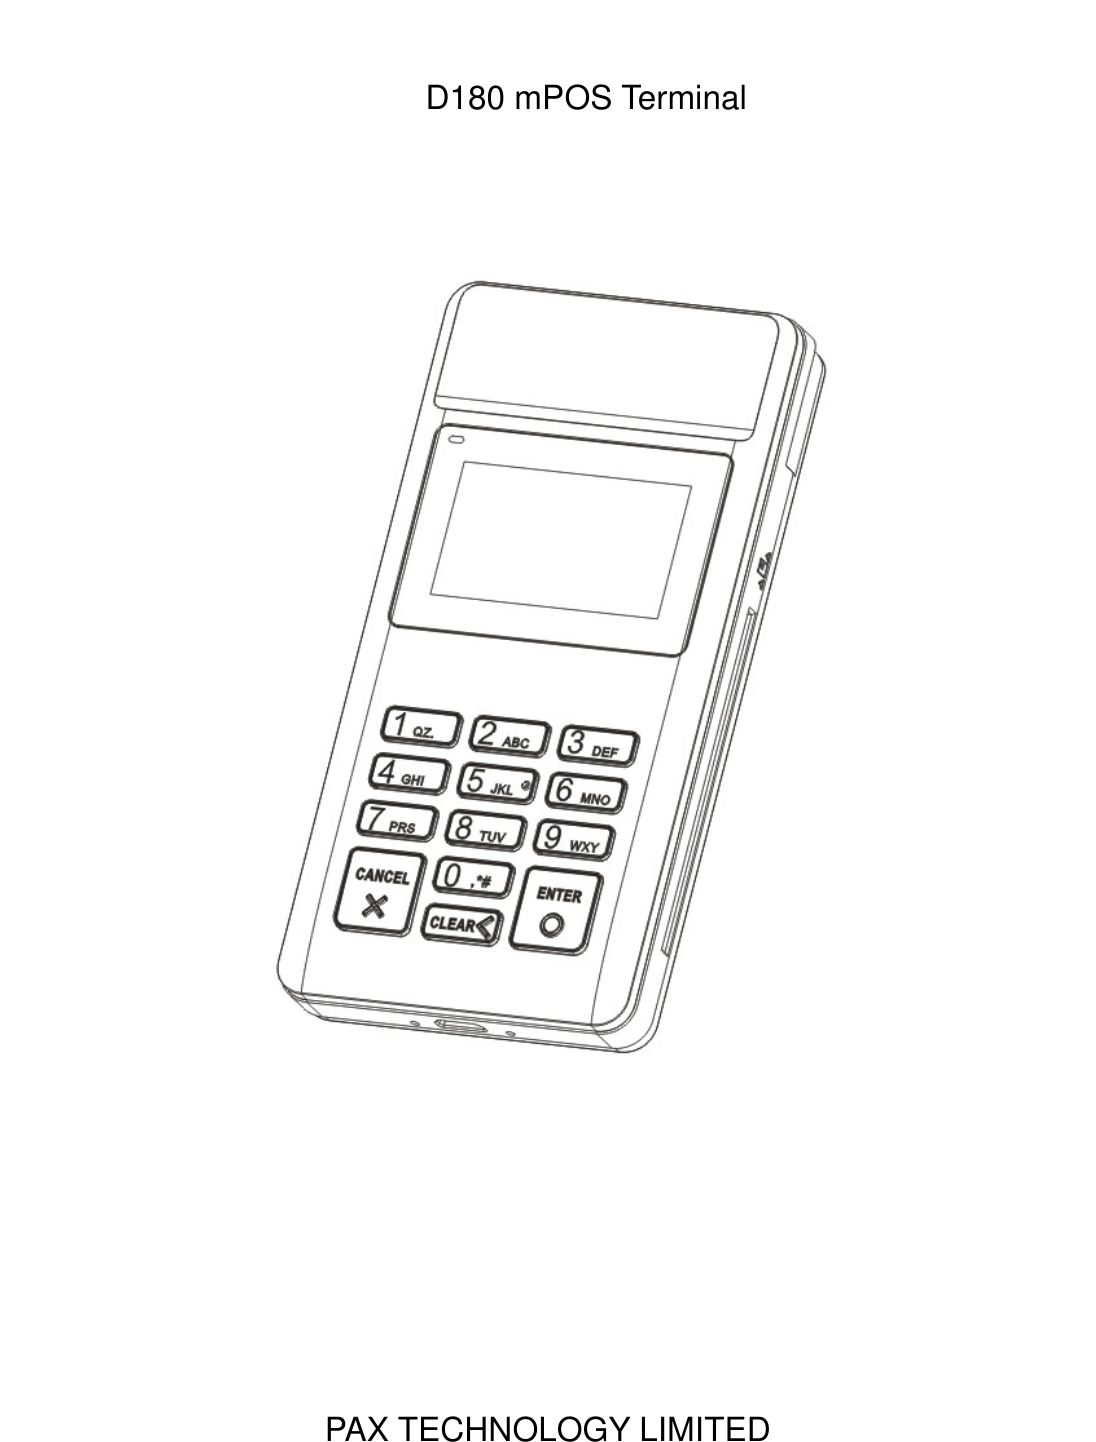   D180 mPOS Terminal         PAX TECHNOLOGY LIMITED  